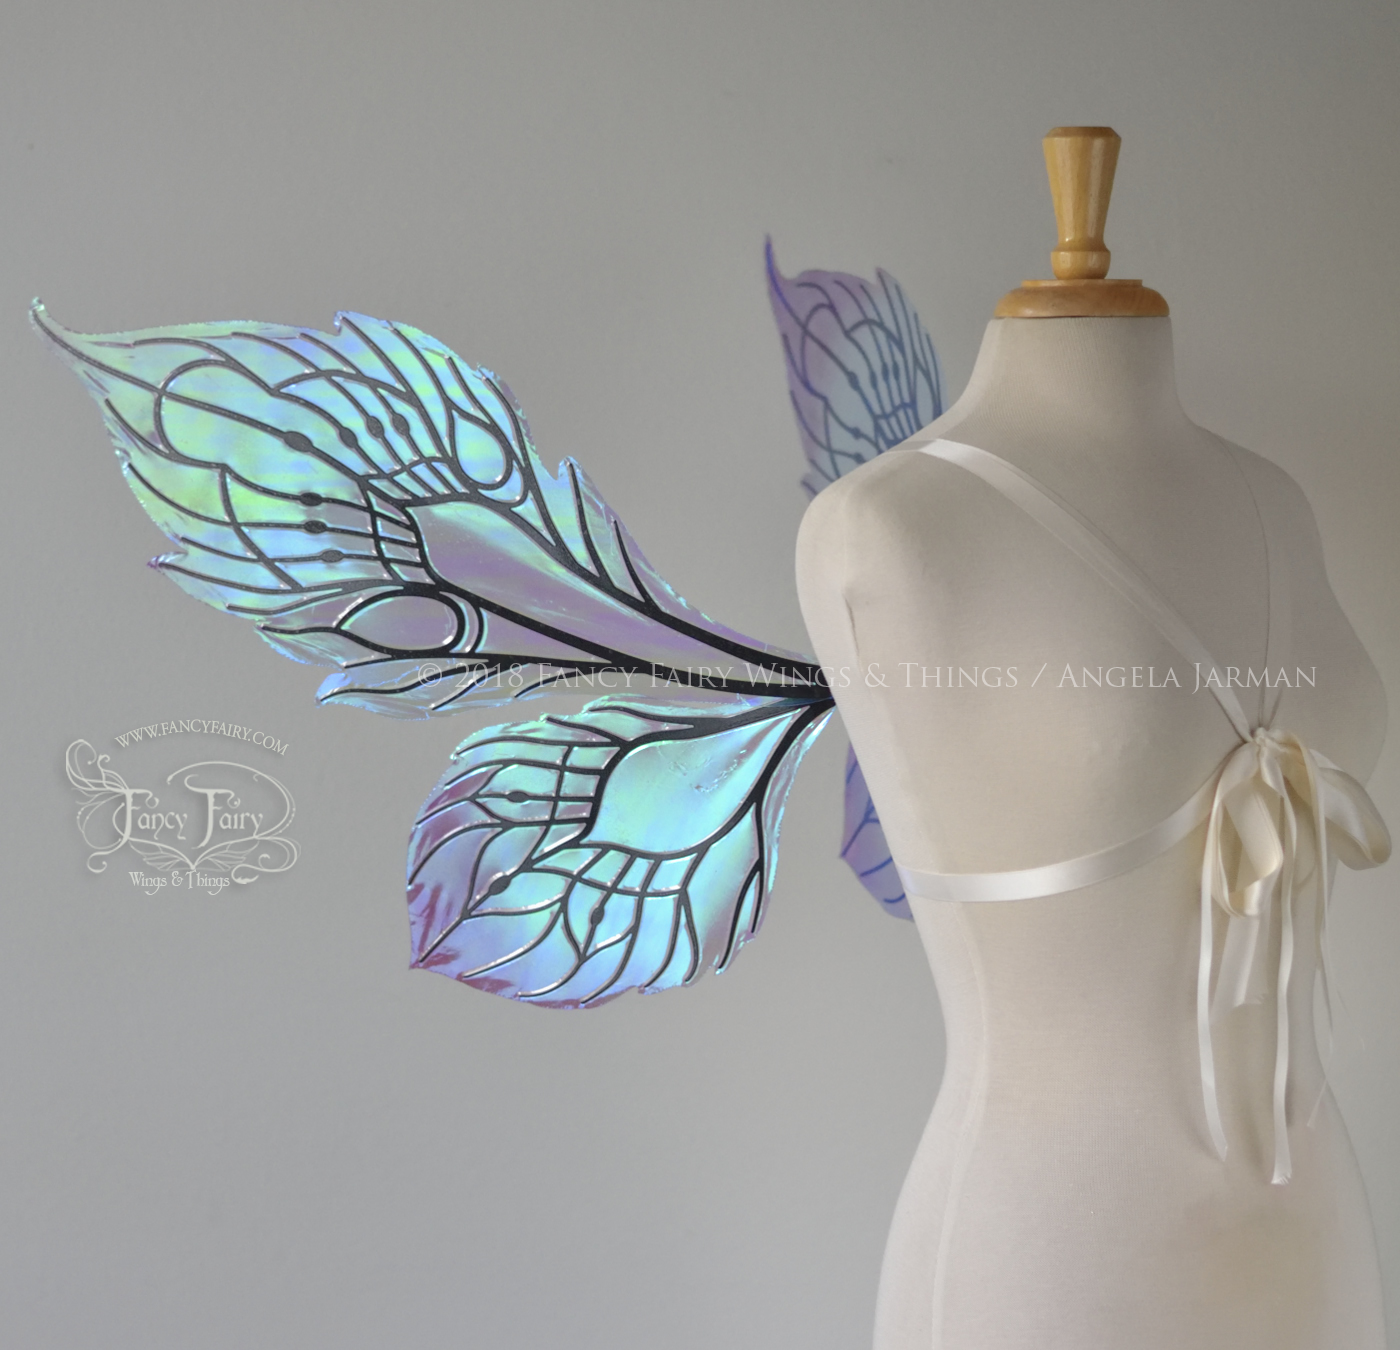 Sintra Iridescent Convertible Fairy Wings Painted Aquamarine and Plum with Black veins